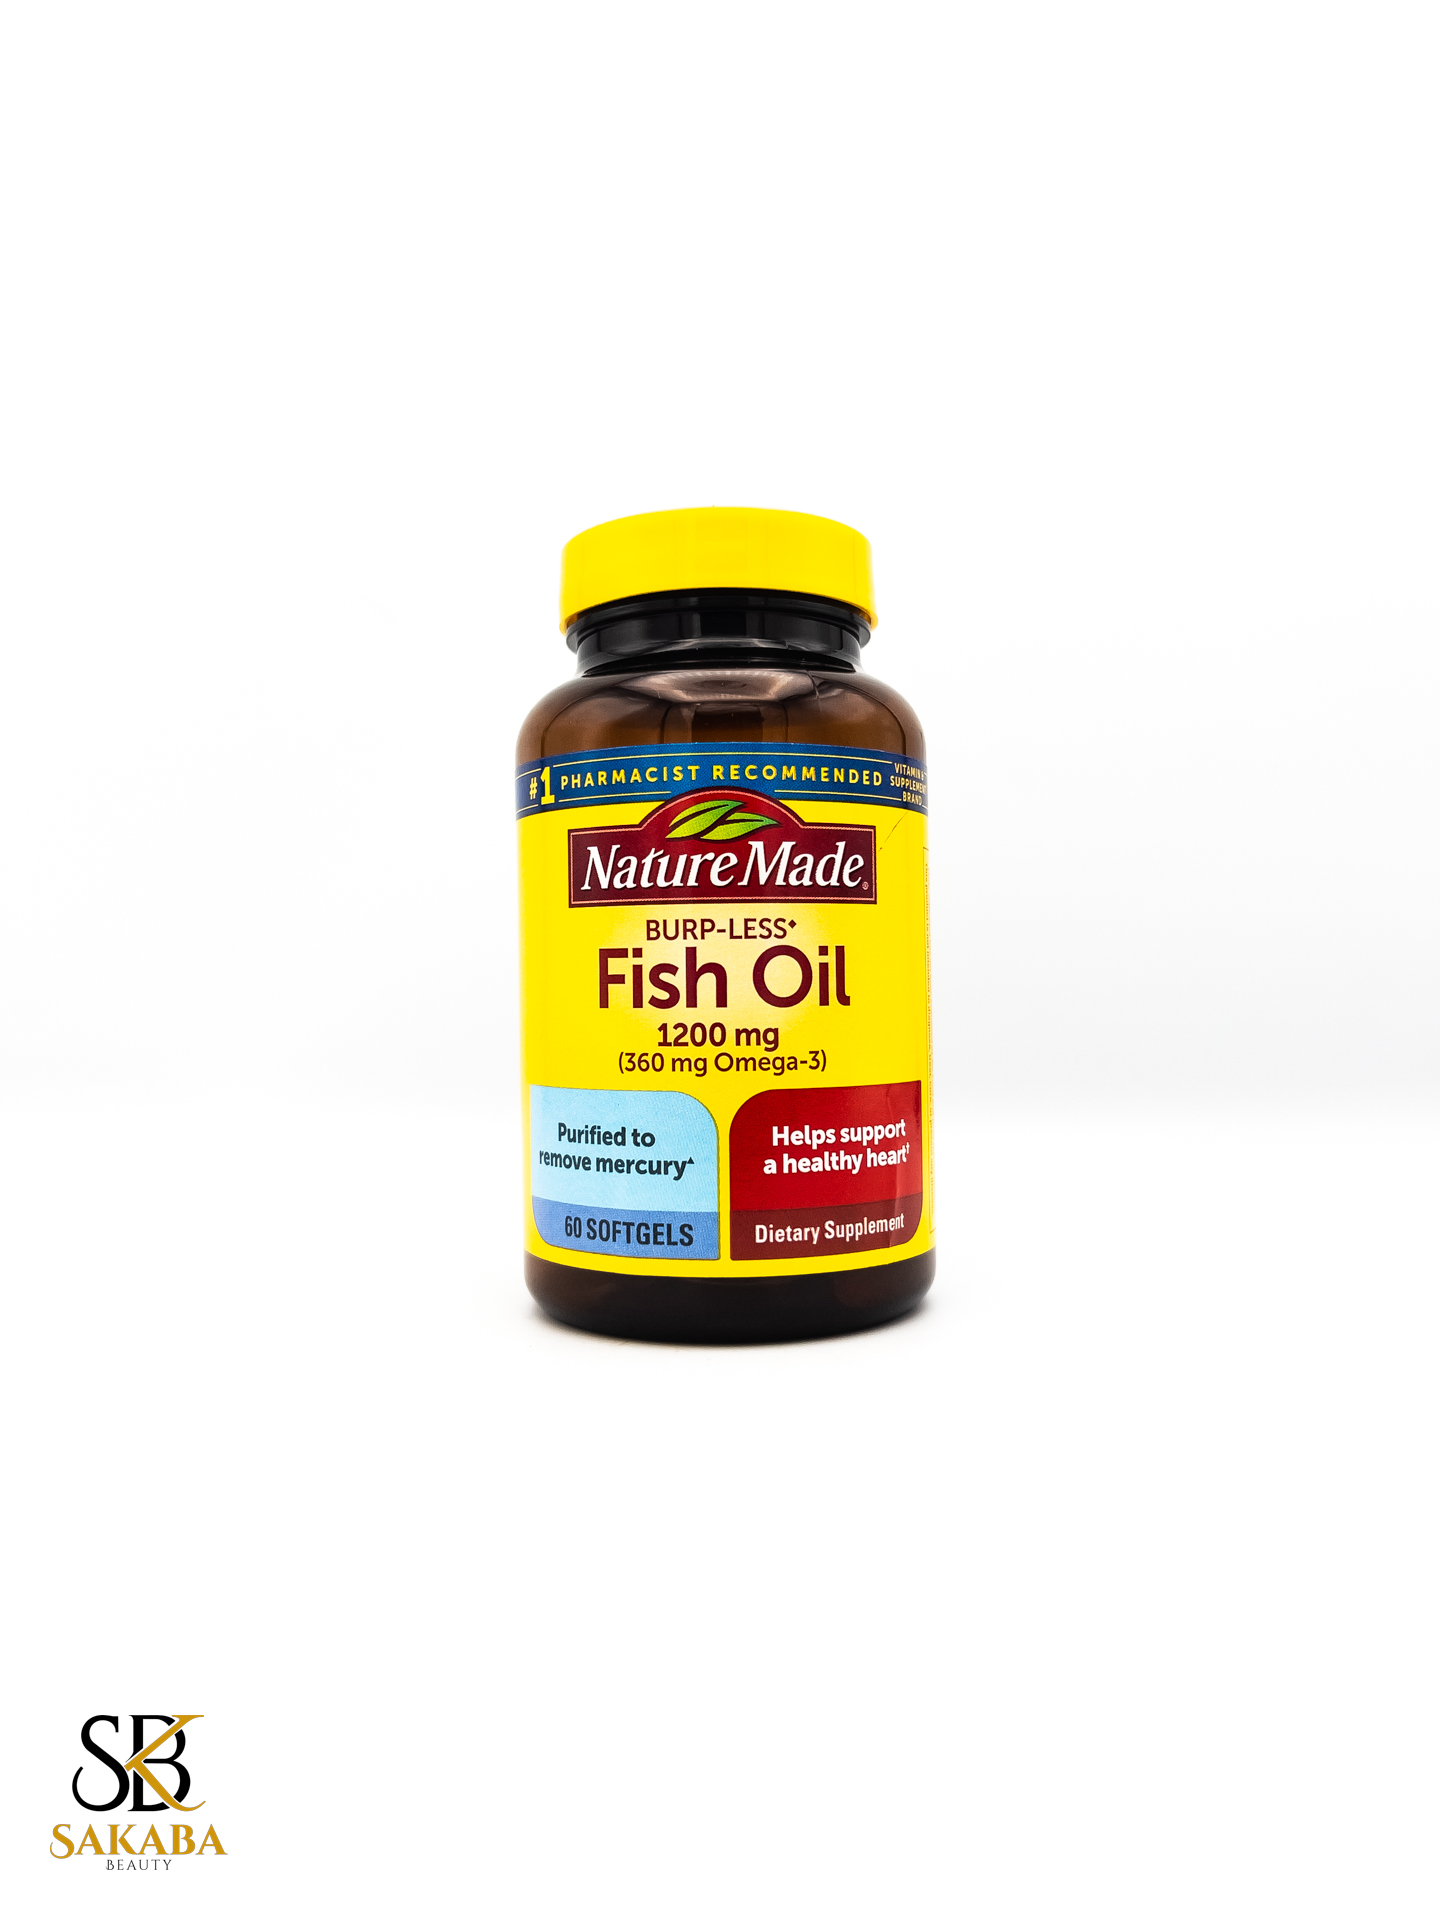 NATURE MADE FISH OIL PM